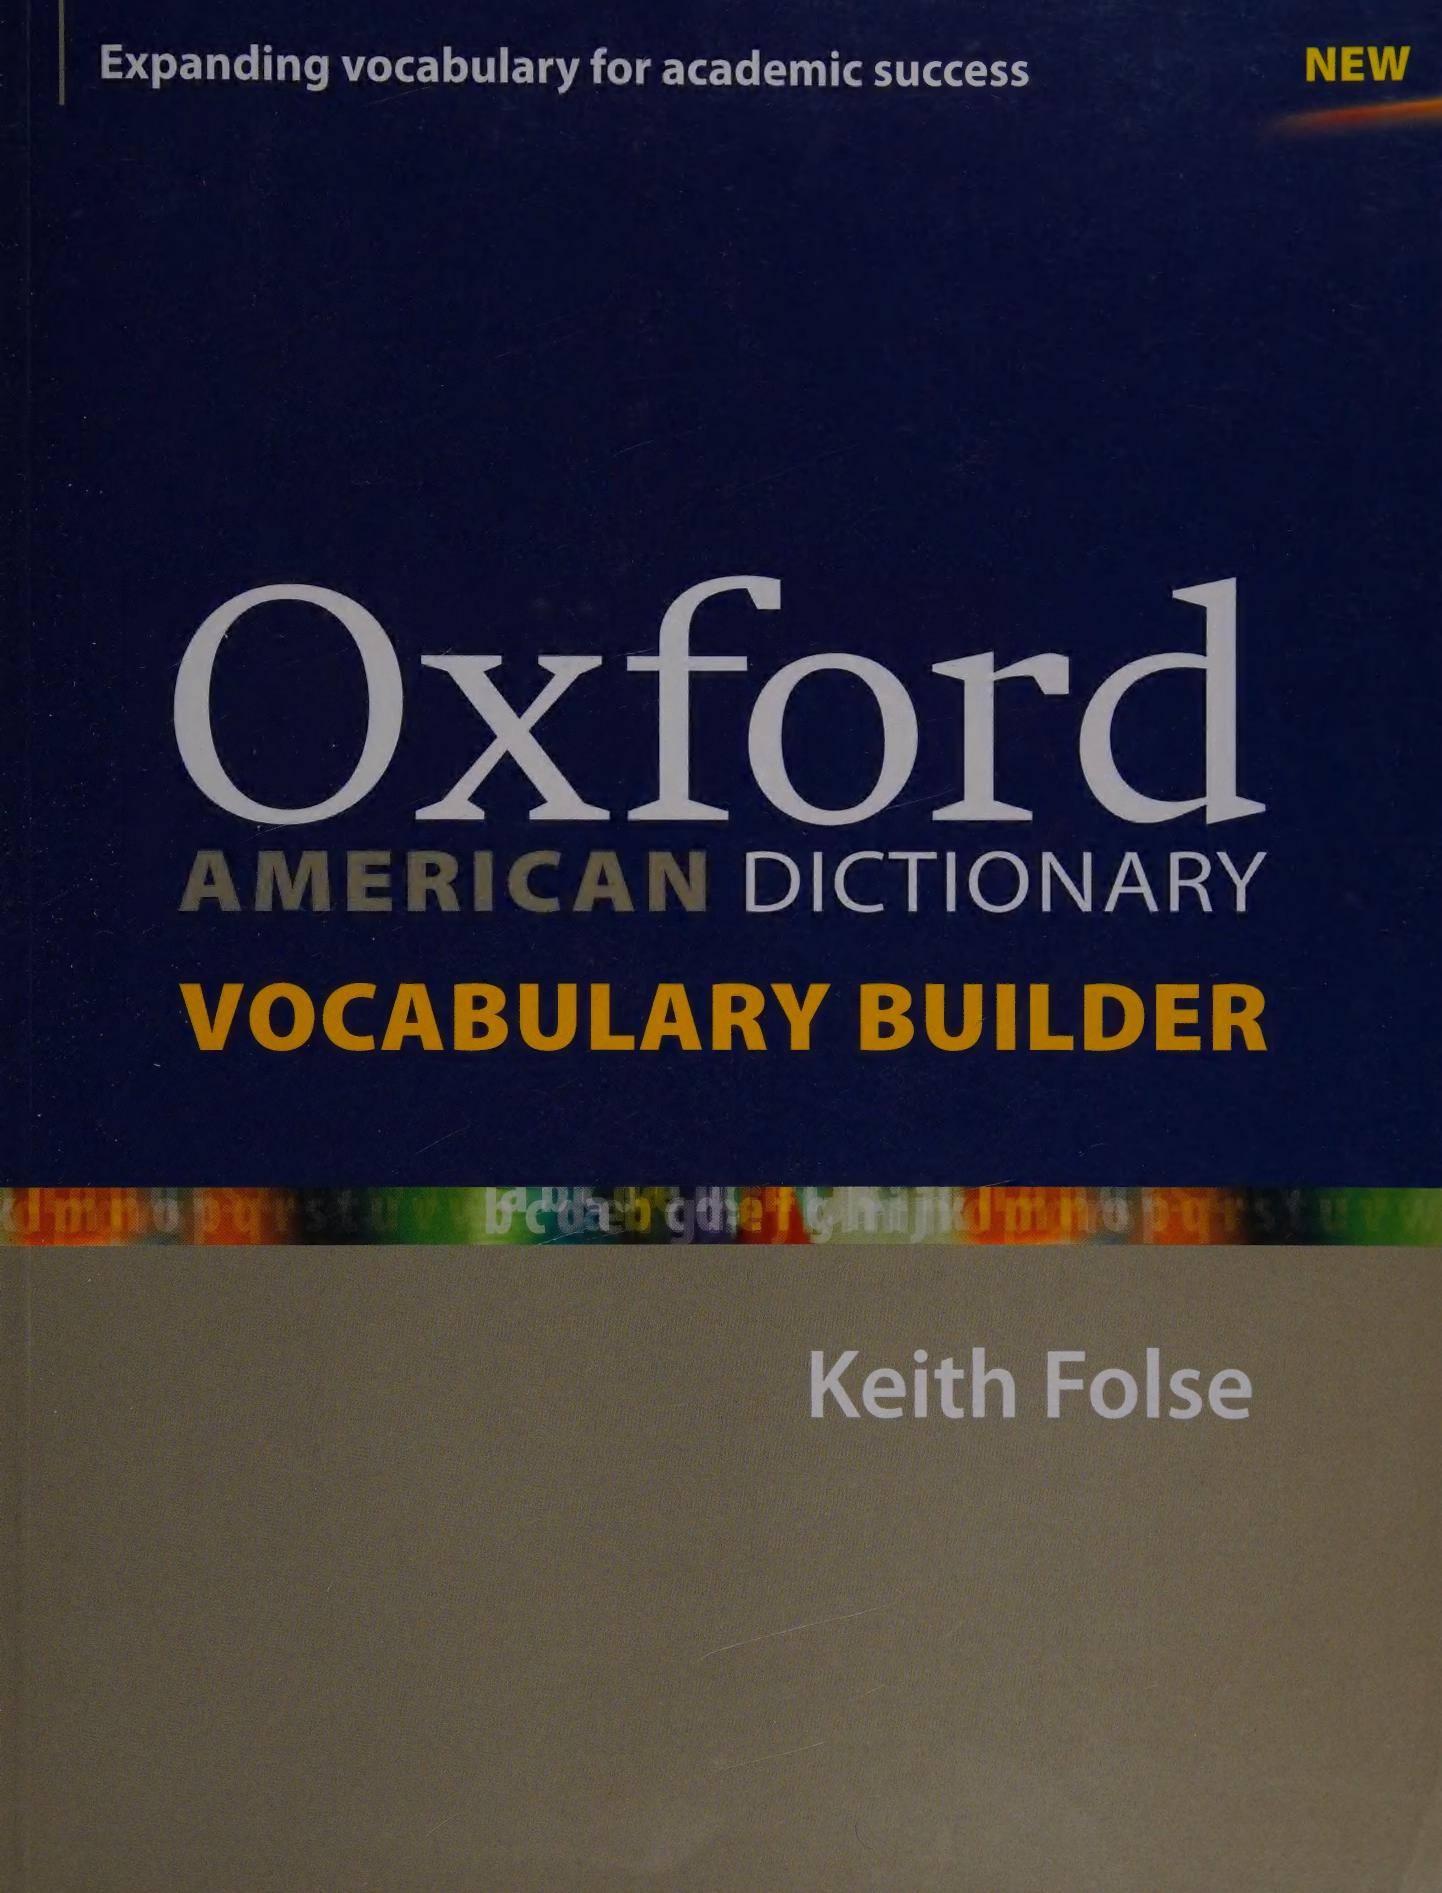 Oxford American Dictionary Vocabulary Builder: Lessons and Activities for English Language Learners (ELLs) to Consolidate and Extend Vocabulary